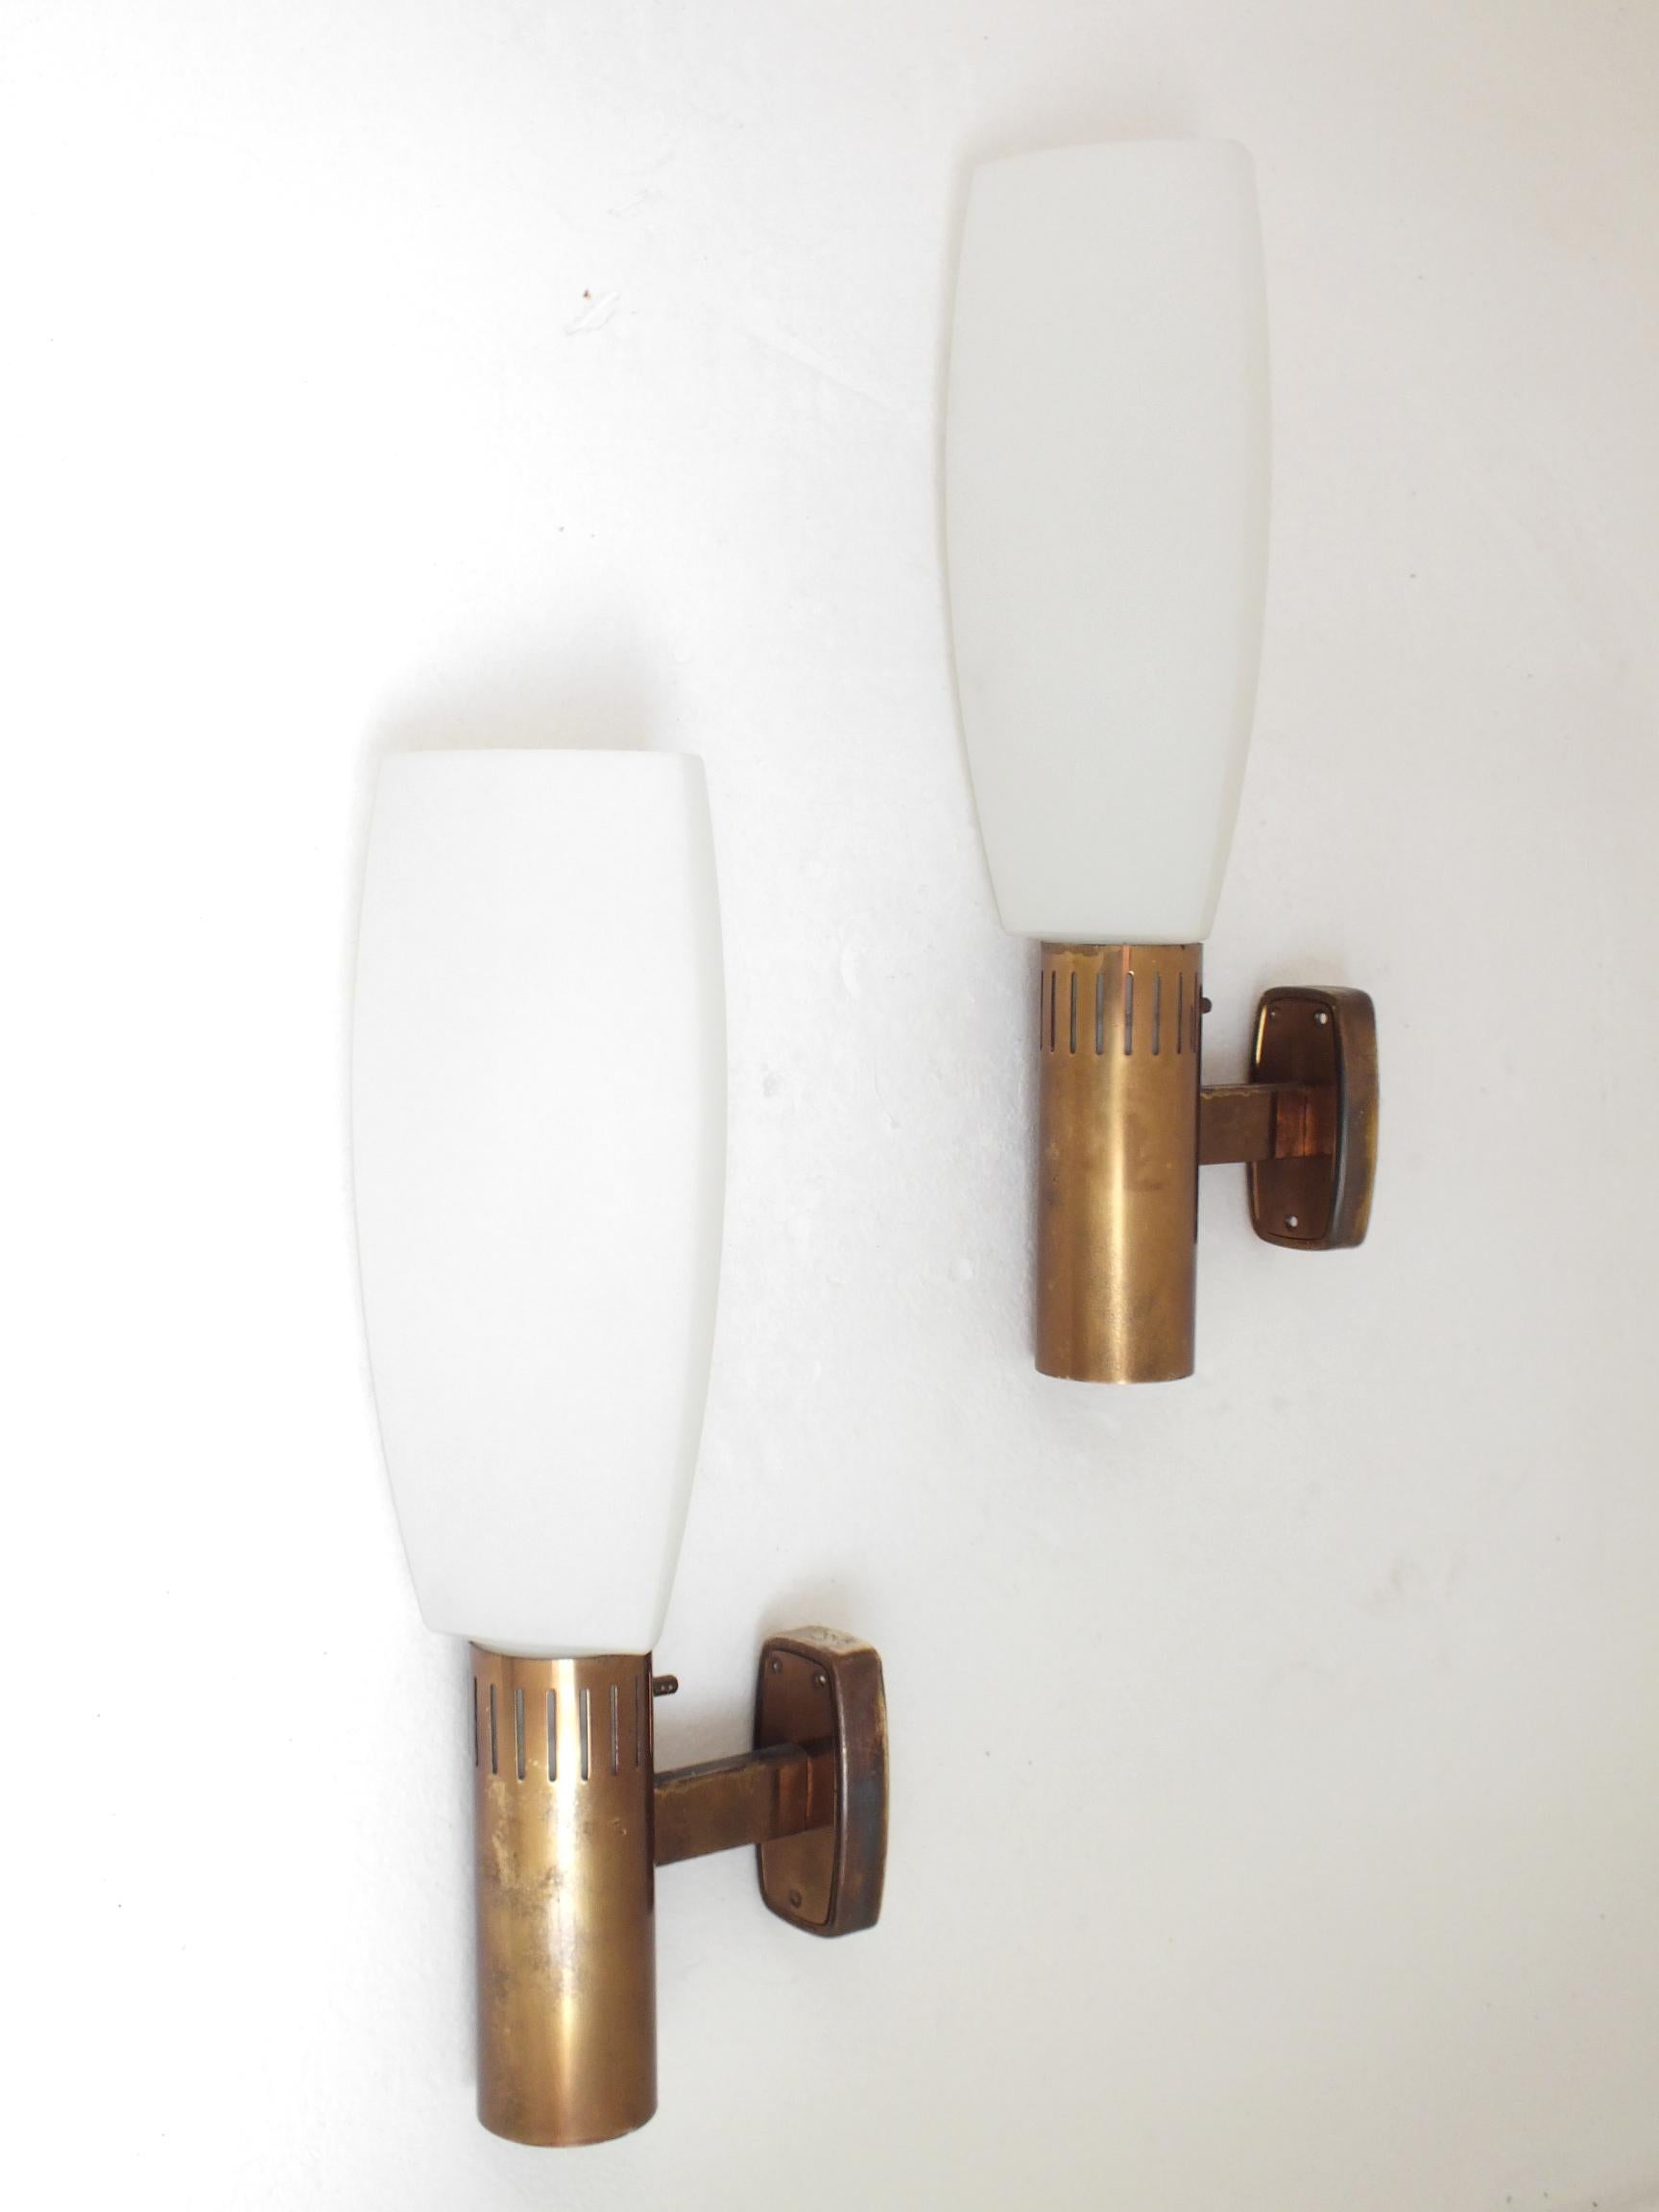 Stilnovo Italy design Bruno Gatta years 60 Italy production set of two wall lamps in brass glass.

 Good vintage condition, no defect.

 Measure: Hight 18 inches x deep 8 inches.